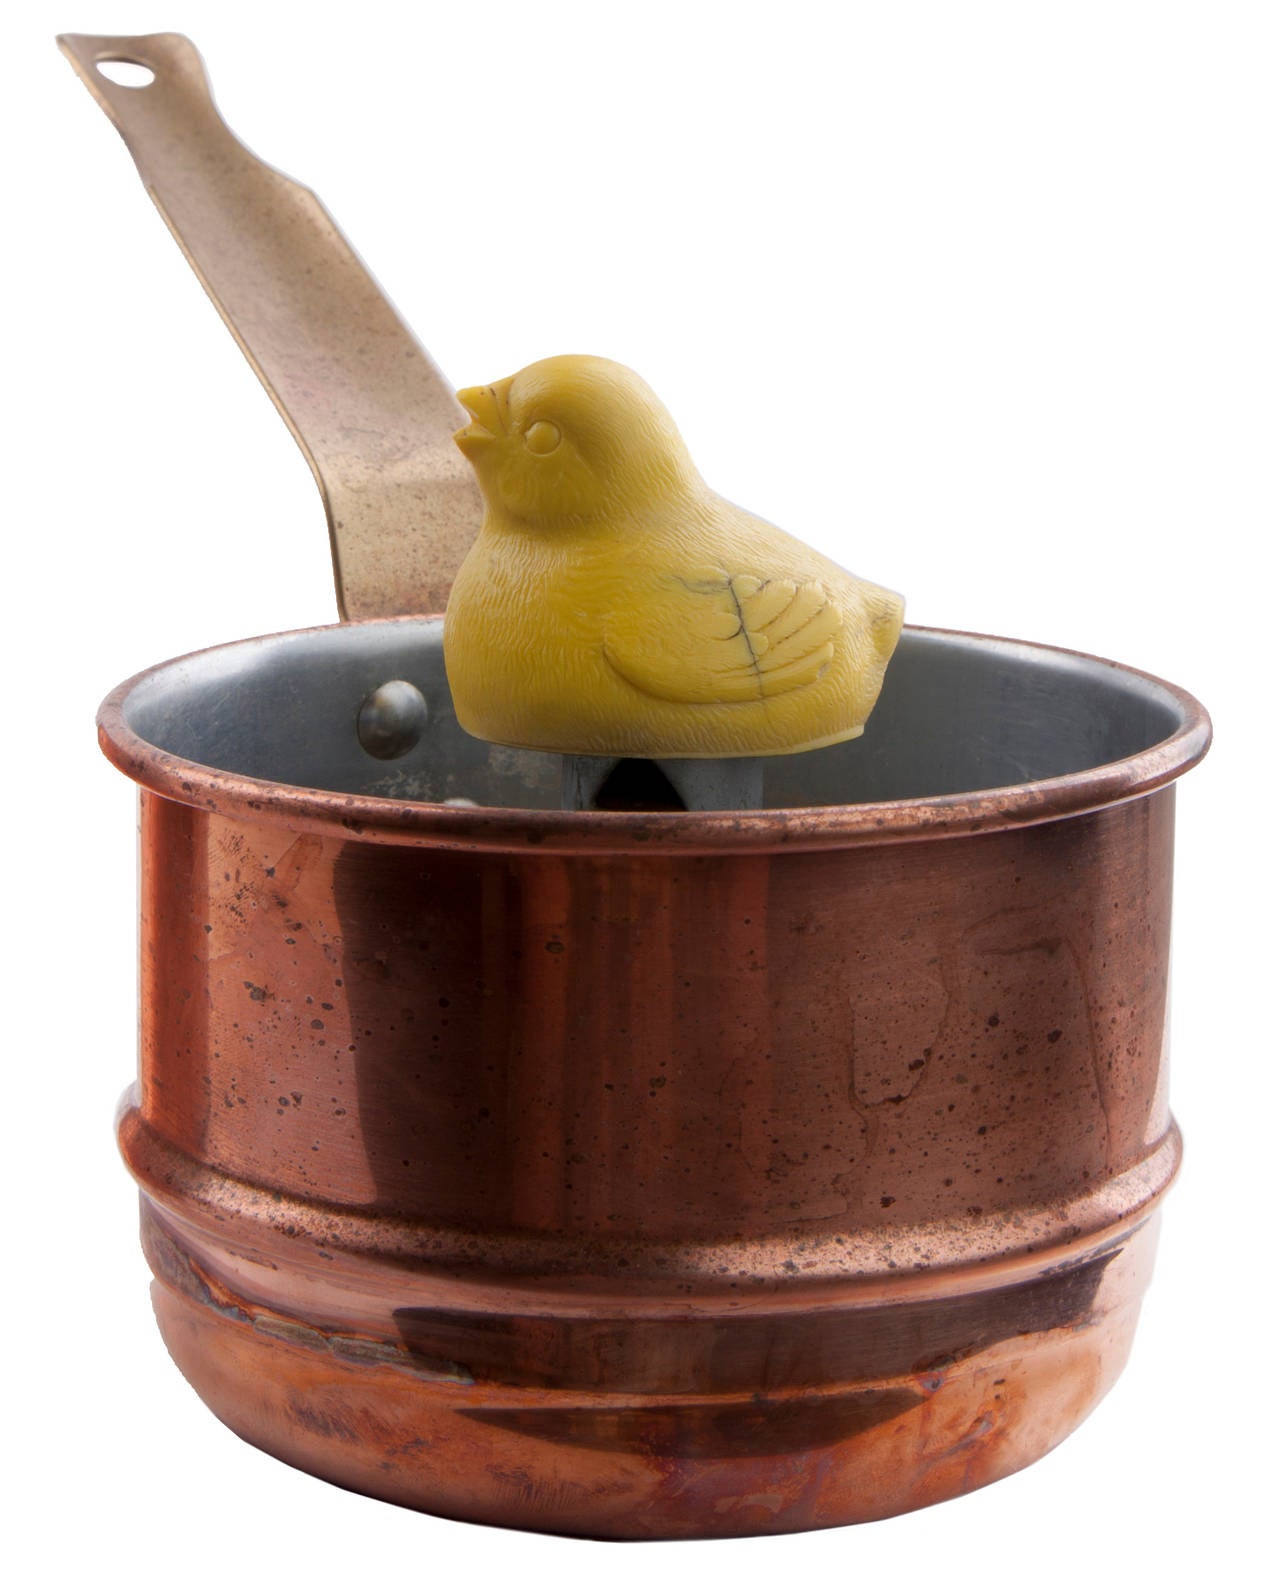 This is a REVERE WARE solid copper egg cooker with a chick that whistles when the water is hot.  It has a fill line on the bottom pot and the chick sits on a post that is marked soft, medium, hard.  The handles appear to be brass. Bottom is marked